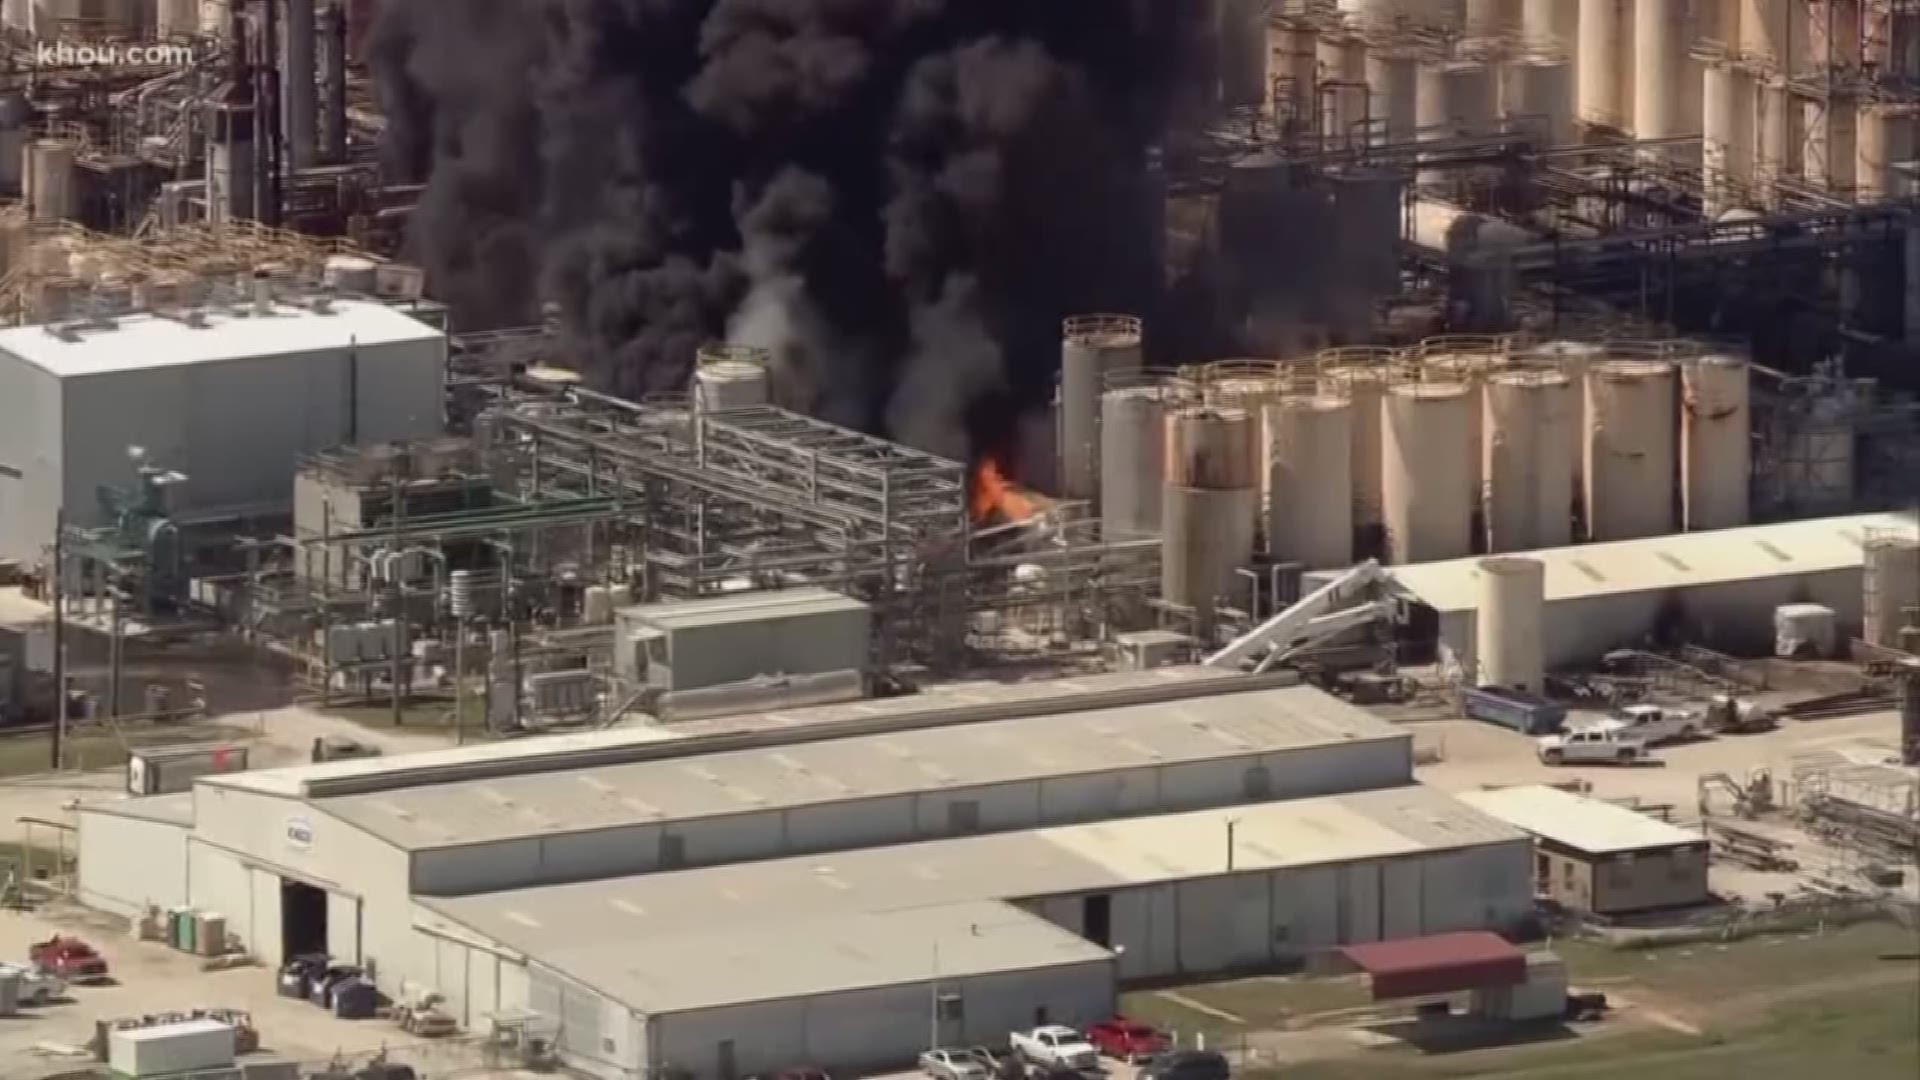 The fire marshal's office has interviewed 50 people about the KMCO plant explosion in Crosby.